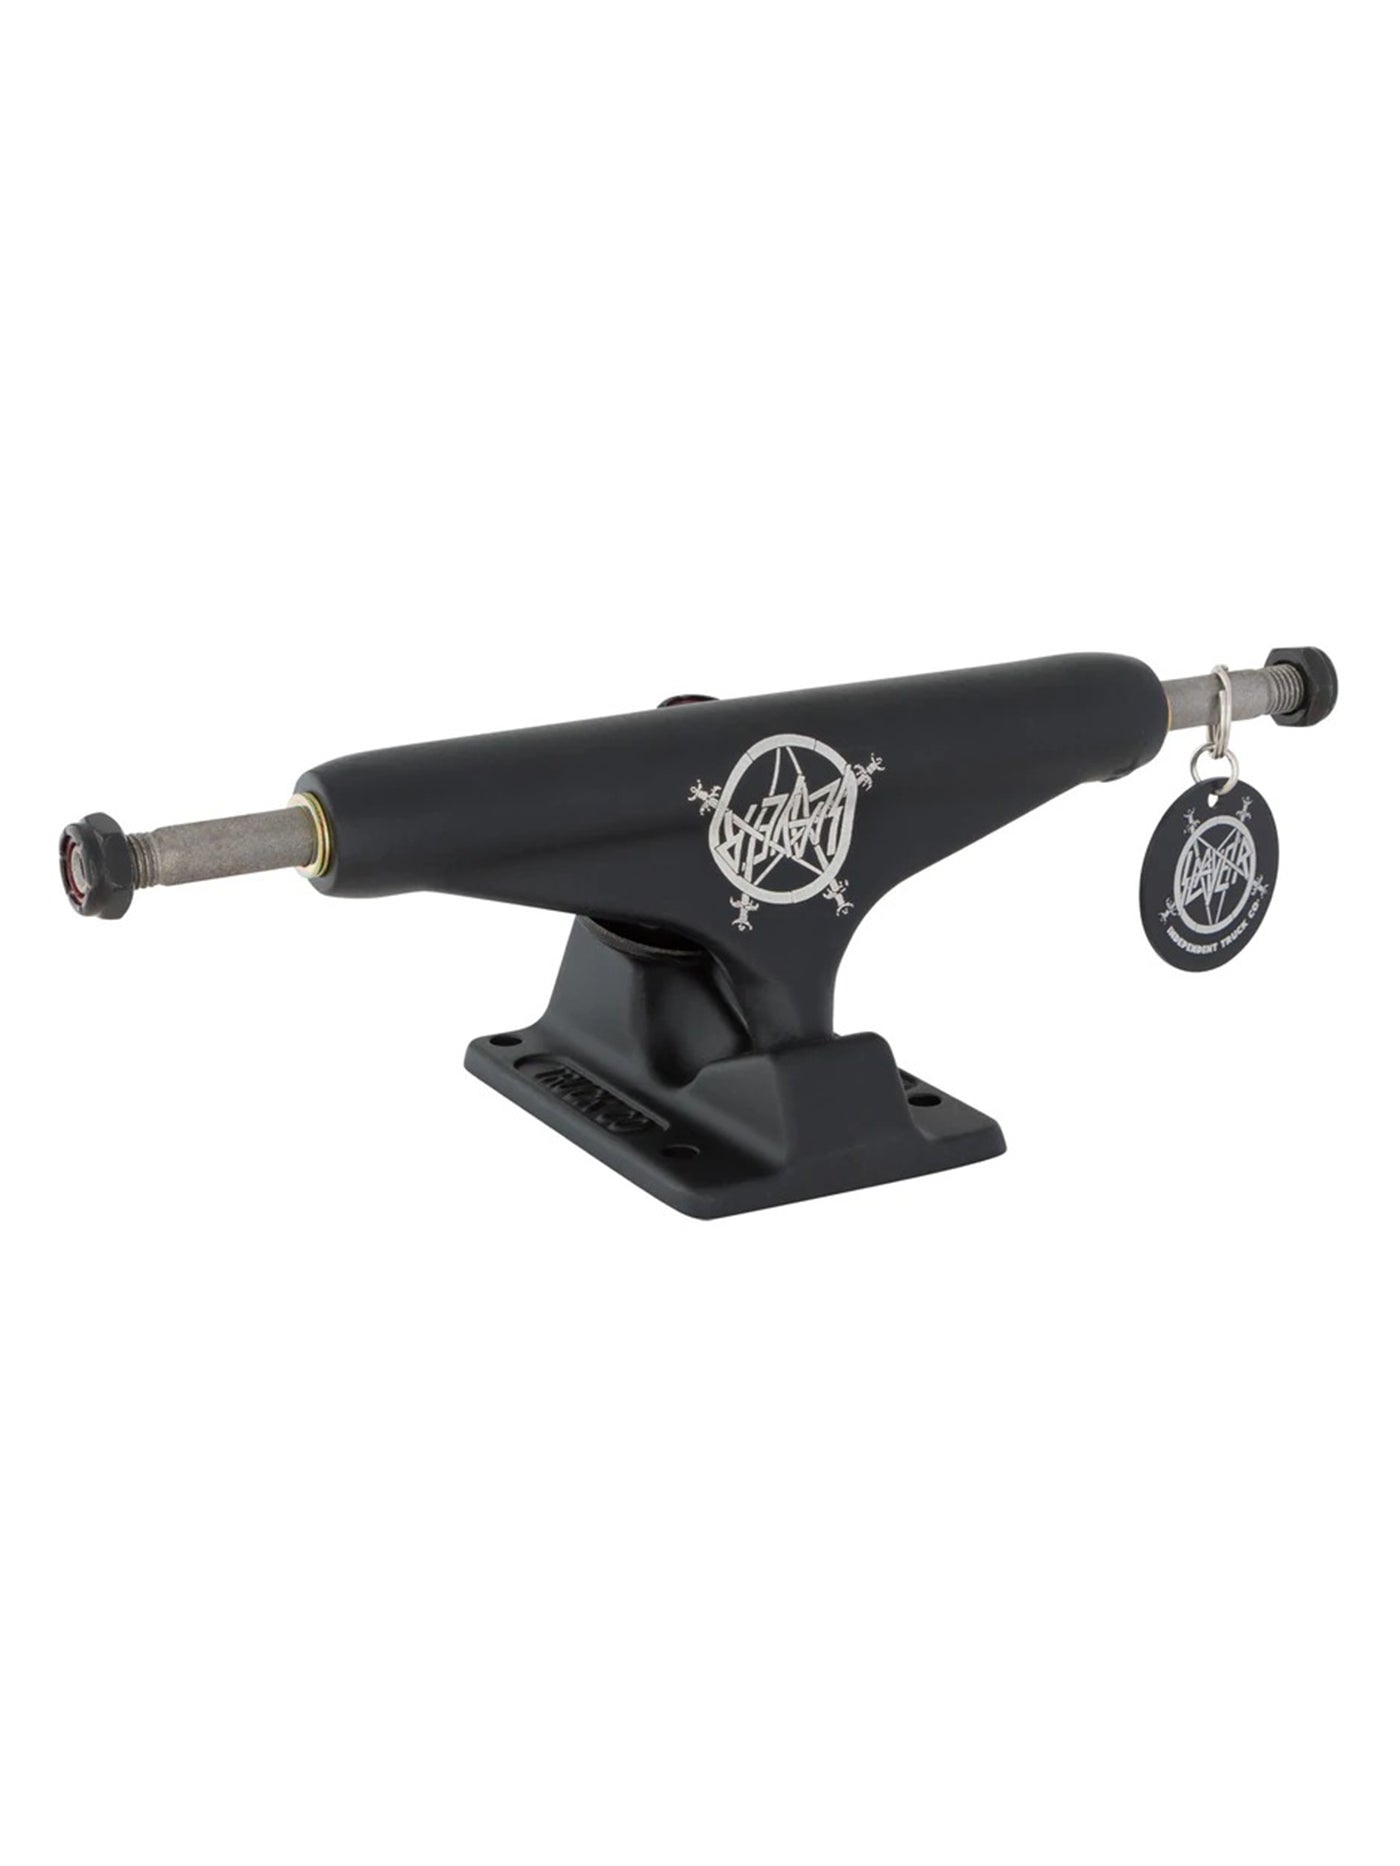 Independant Forged Hollow Stage XI 149 MM Trucks